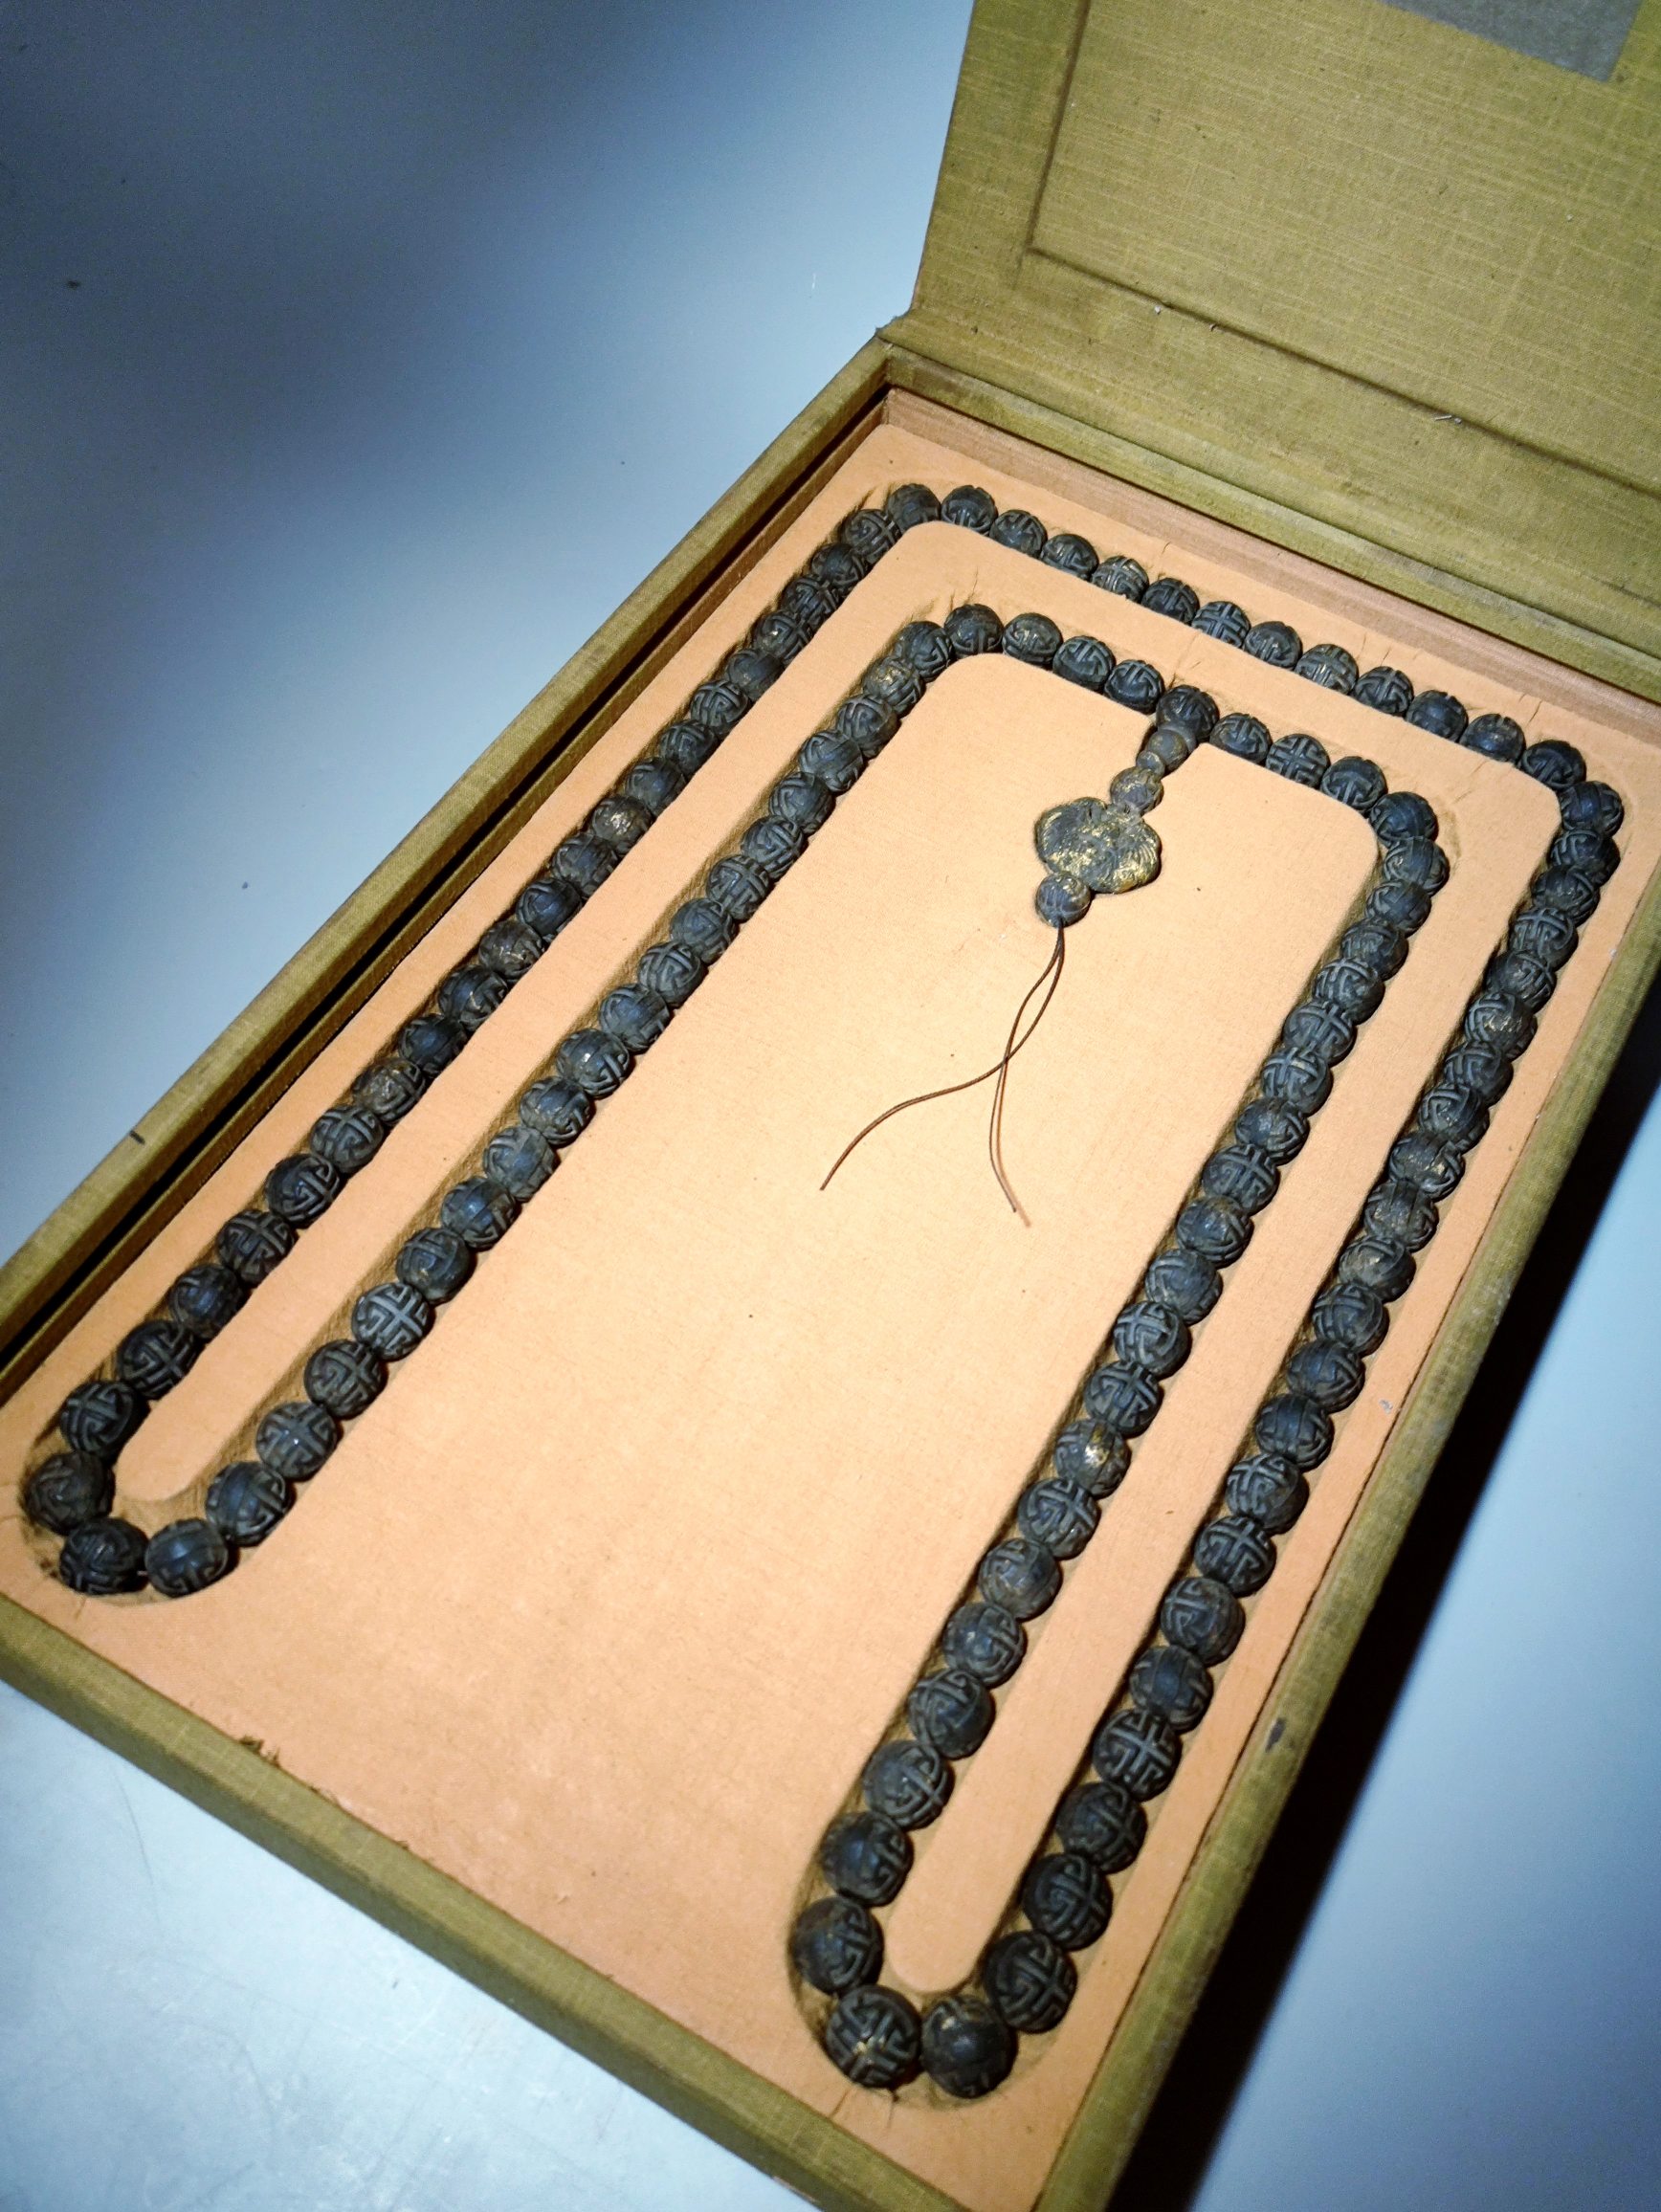 A set of agarwood beads collected by the Qing Palace - Image 2 of 9